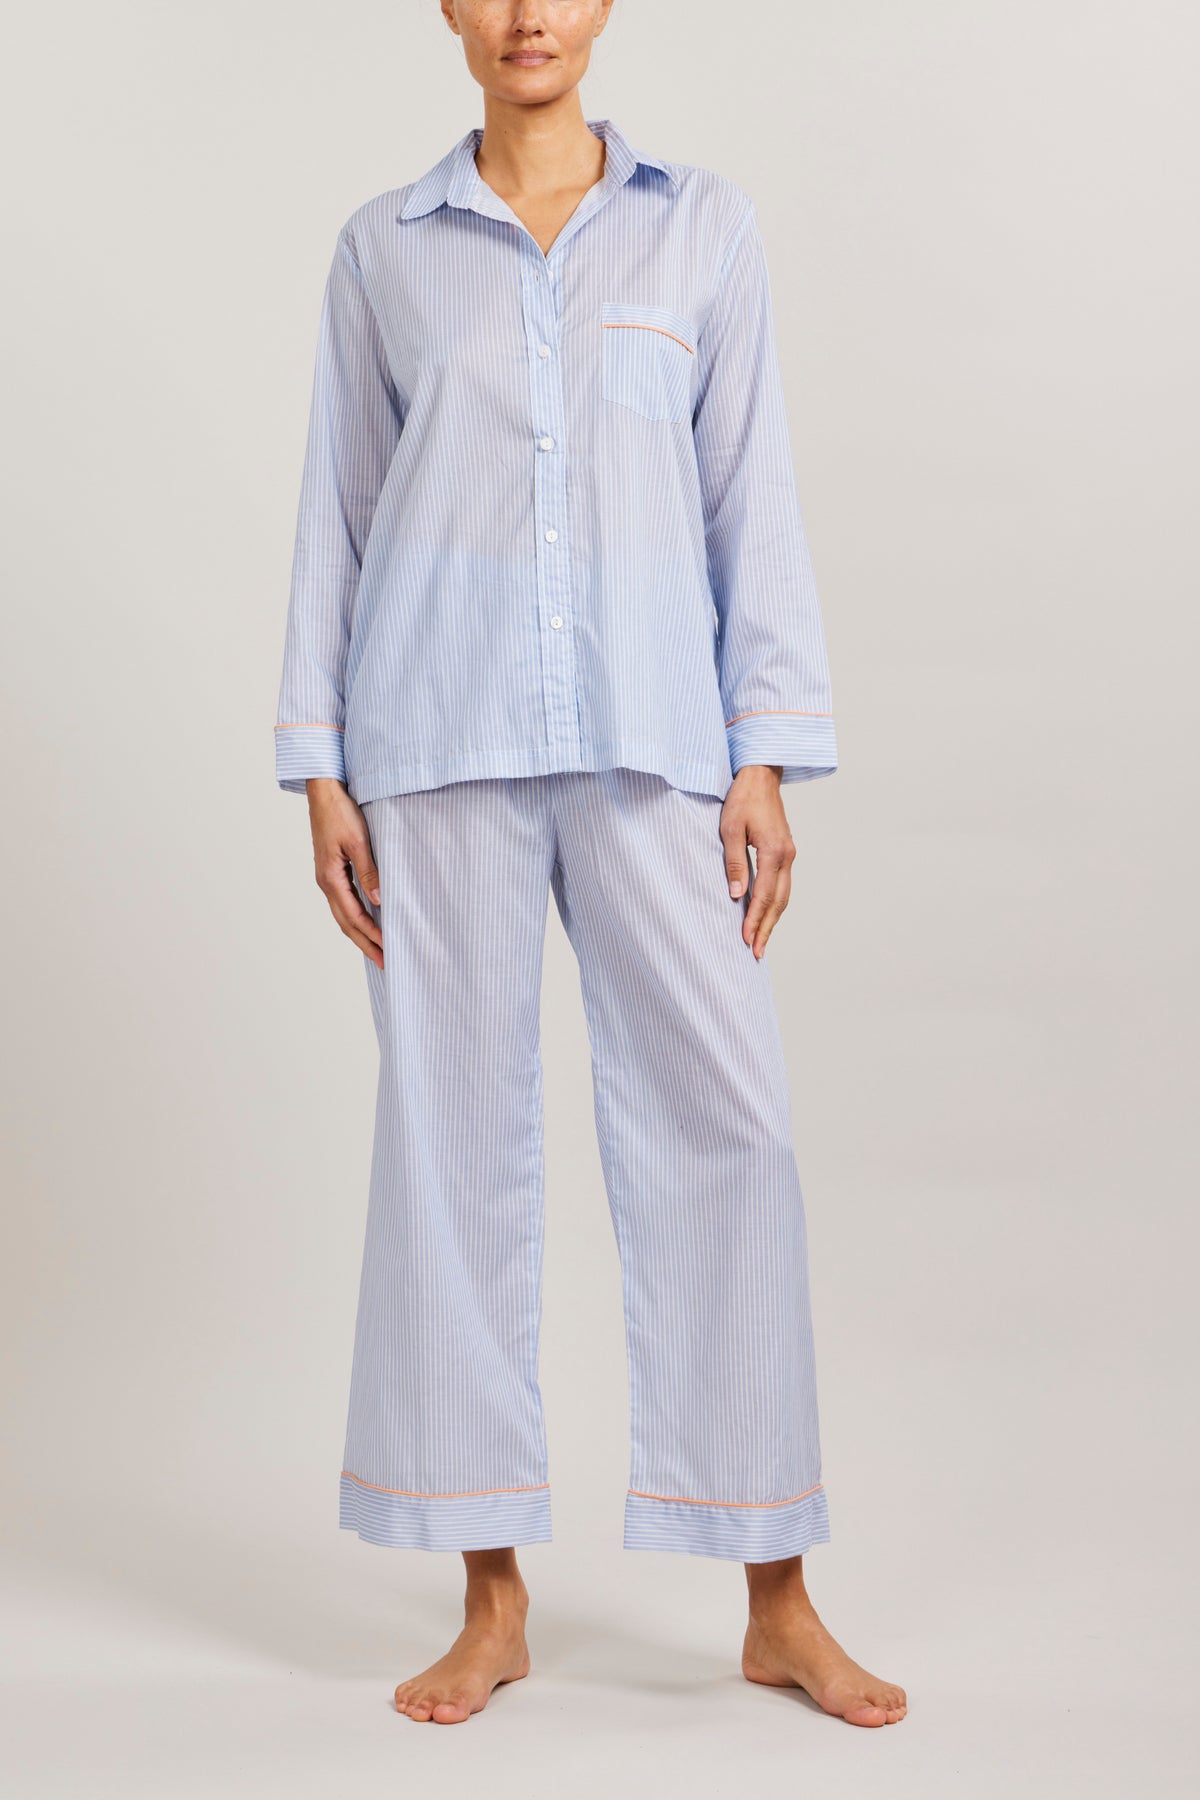 Long Sleeve PJ Set in Chambray Stripe Piped in Coral